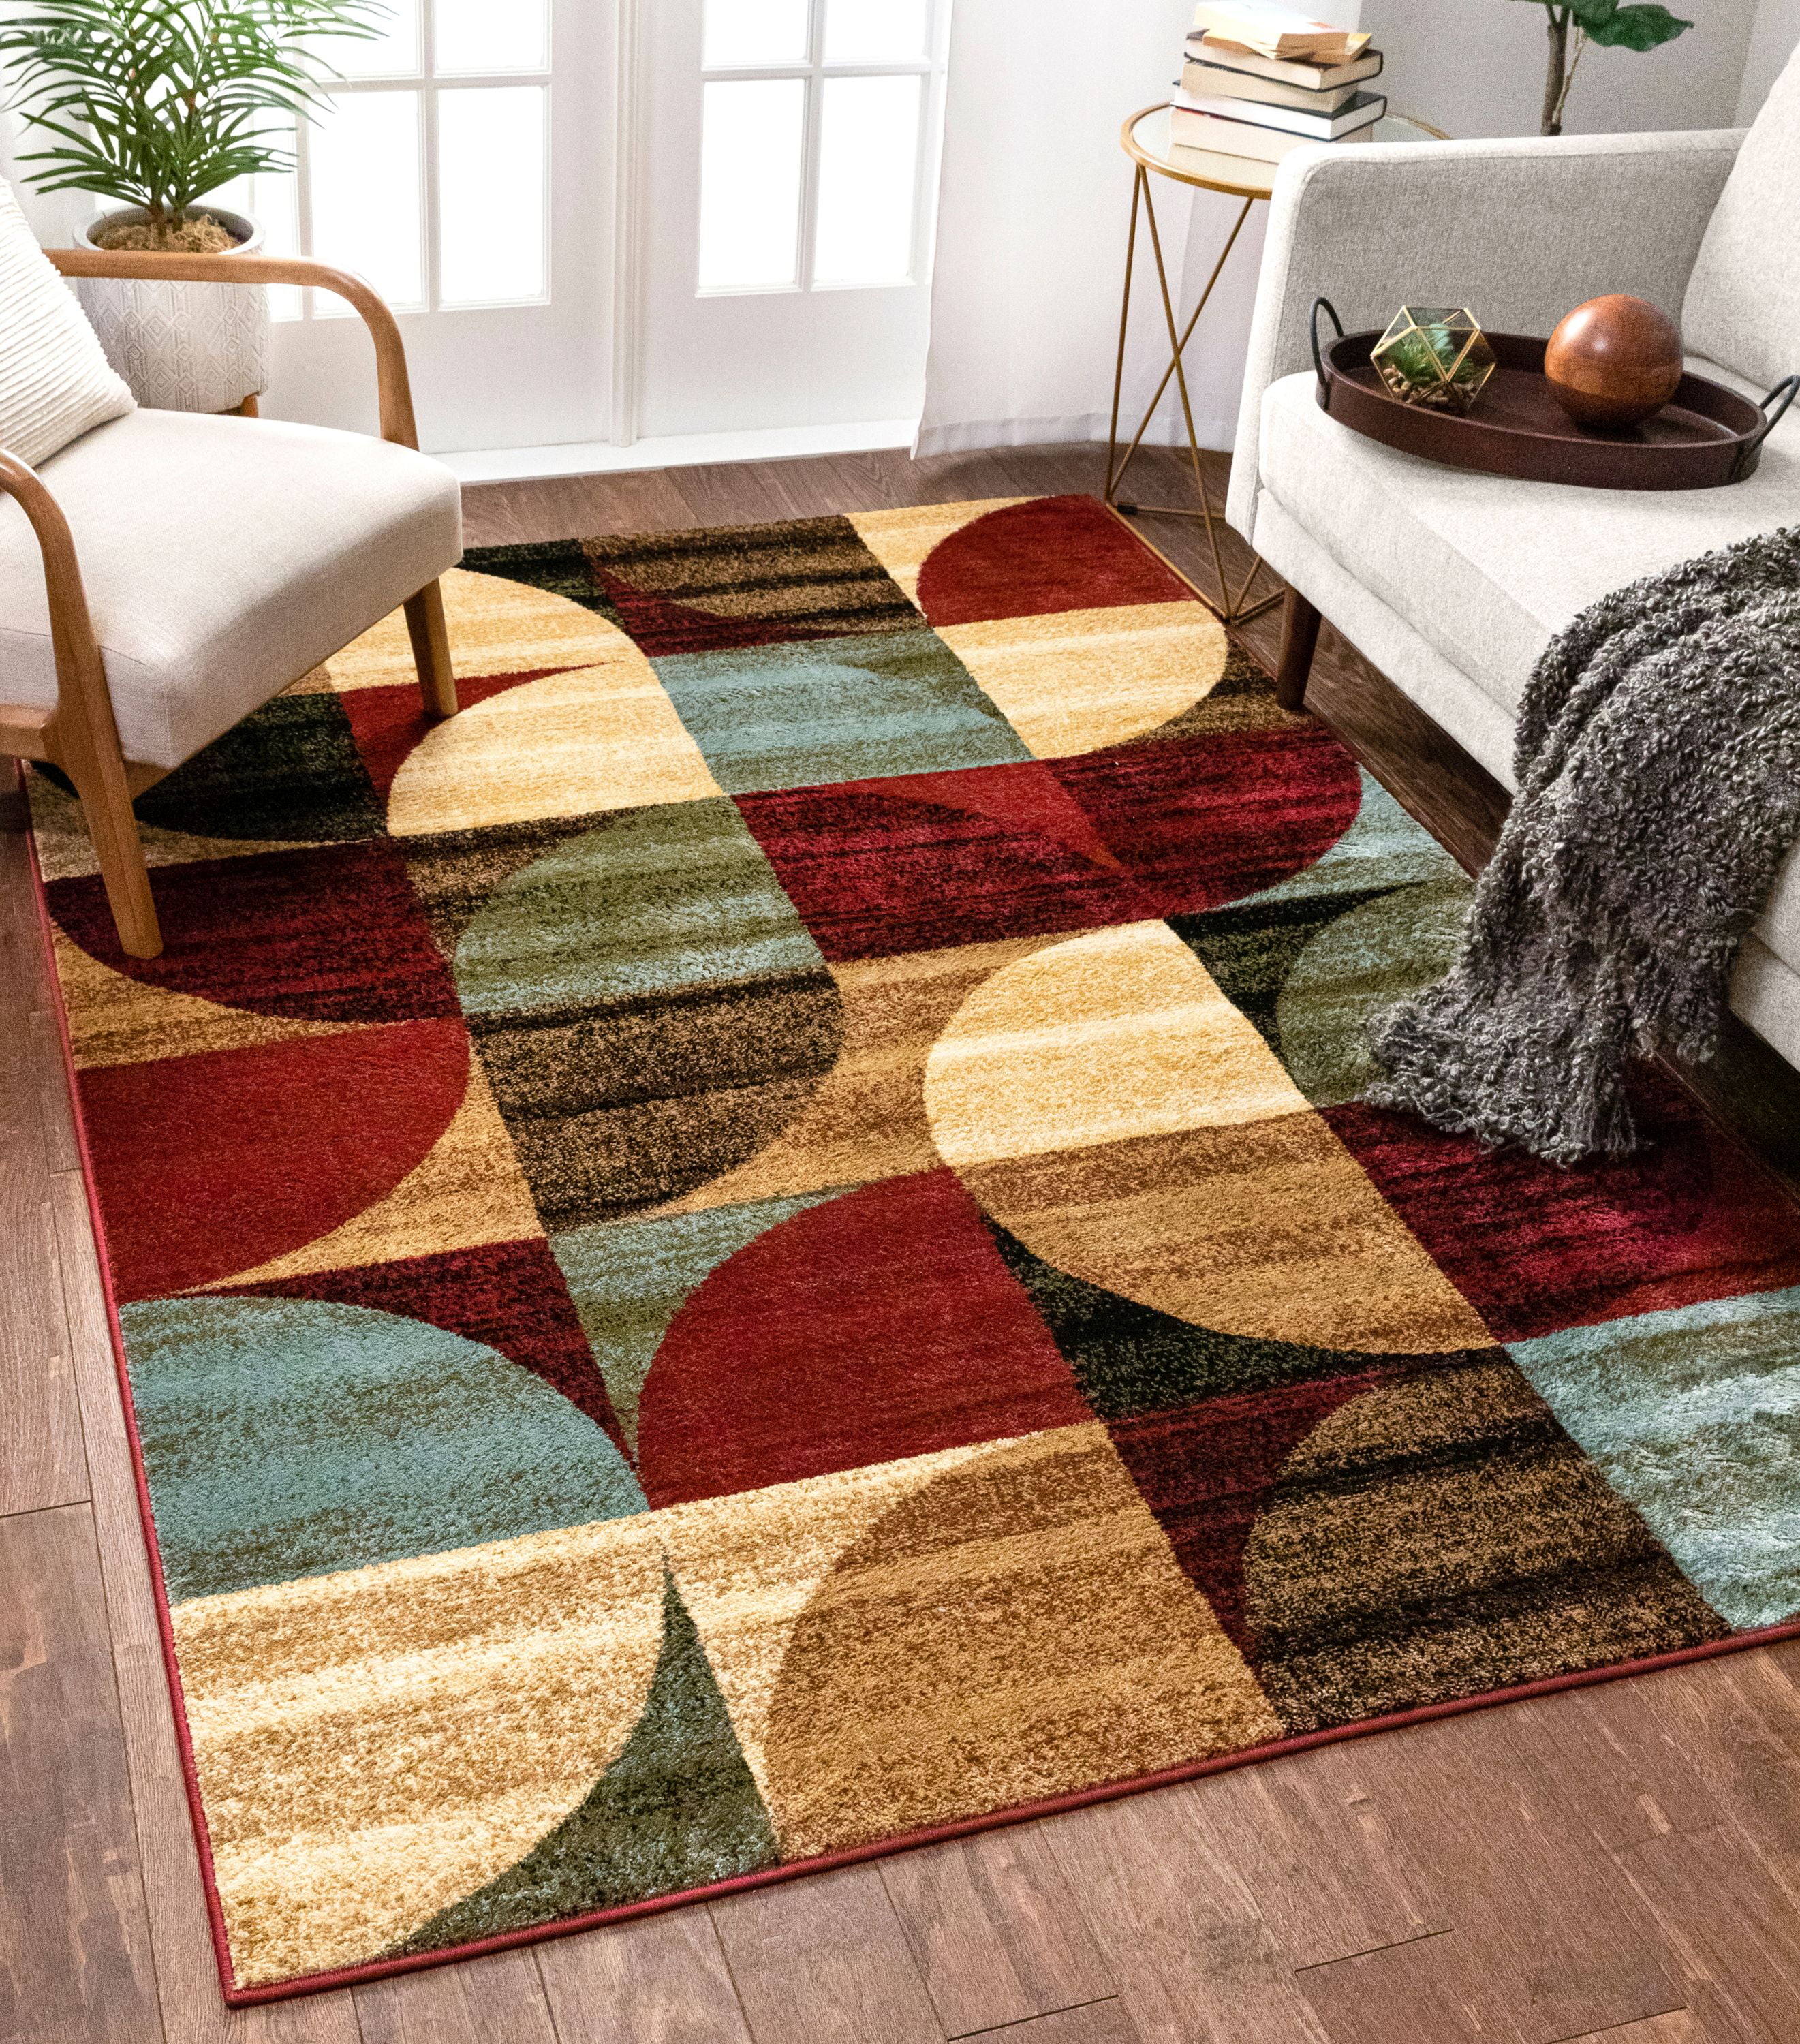 Well Woven Mid Century Modern Multicolor Geometric Modern Area Rug 5x7 5'3 x 7'3 Easy to Clean StainShed Free Abstract Contemporary Color Block Boxes Soft Living Dining Room Rug 